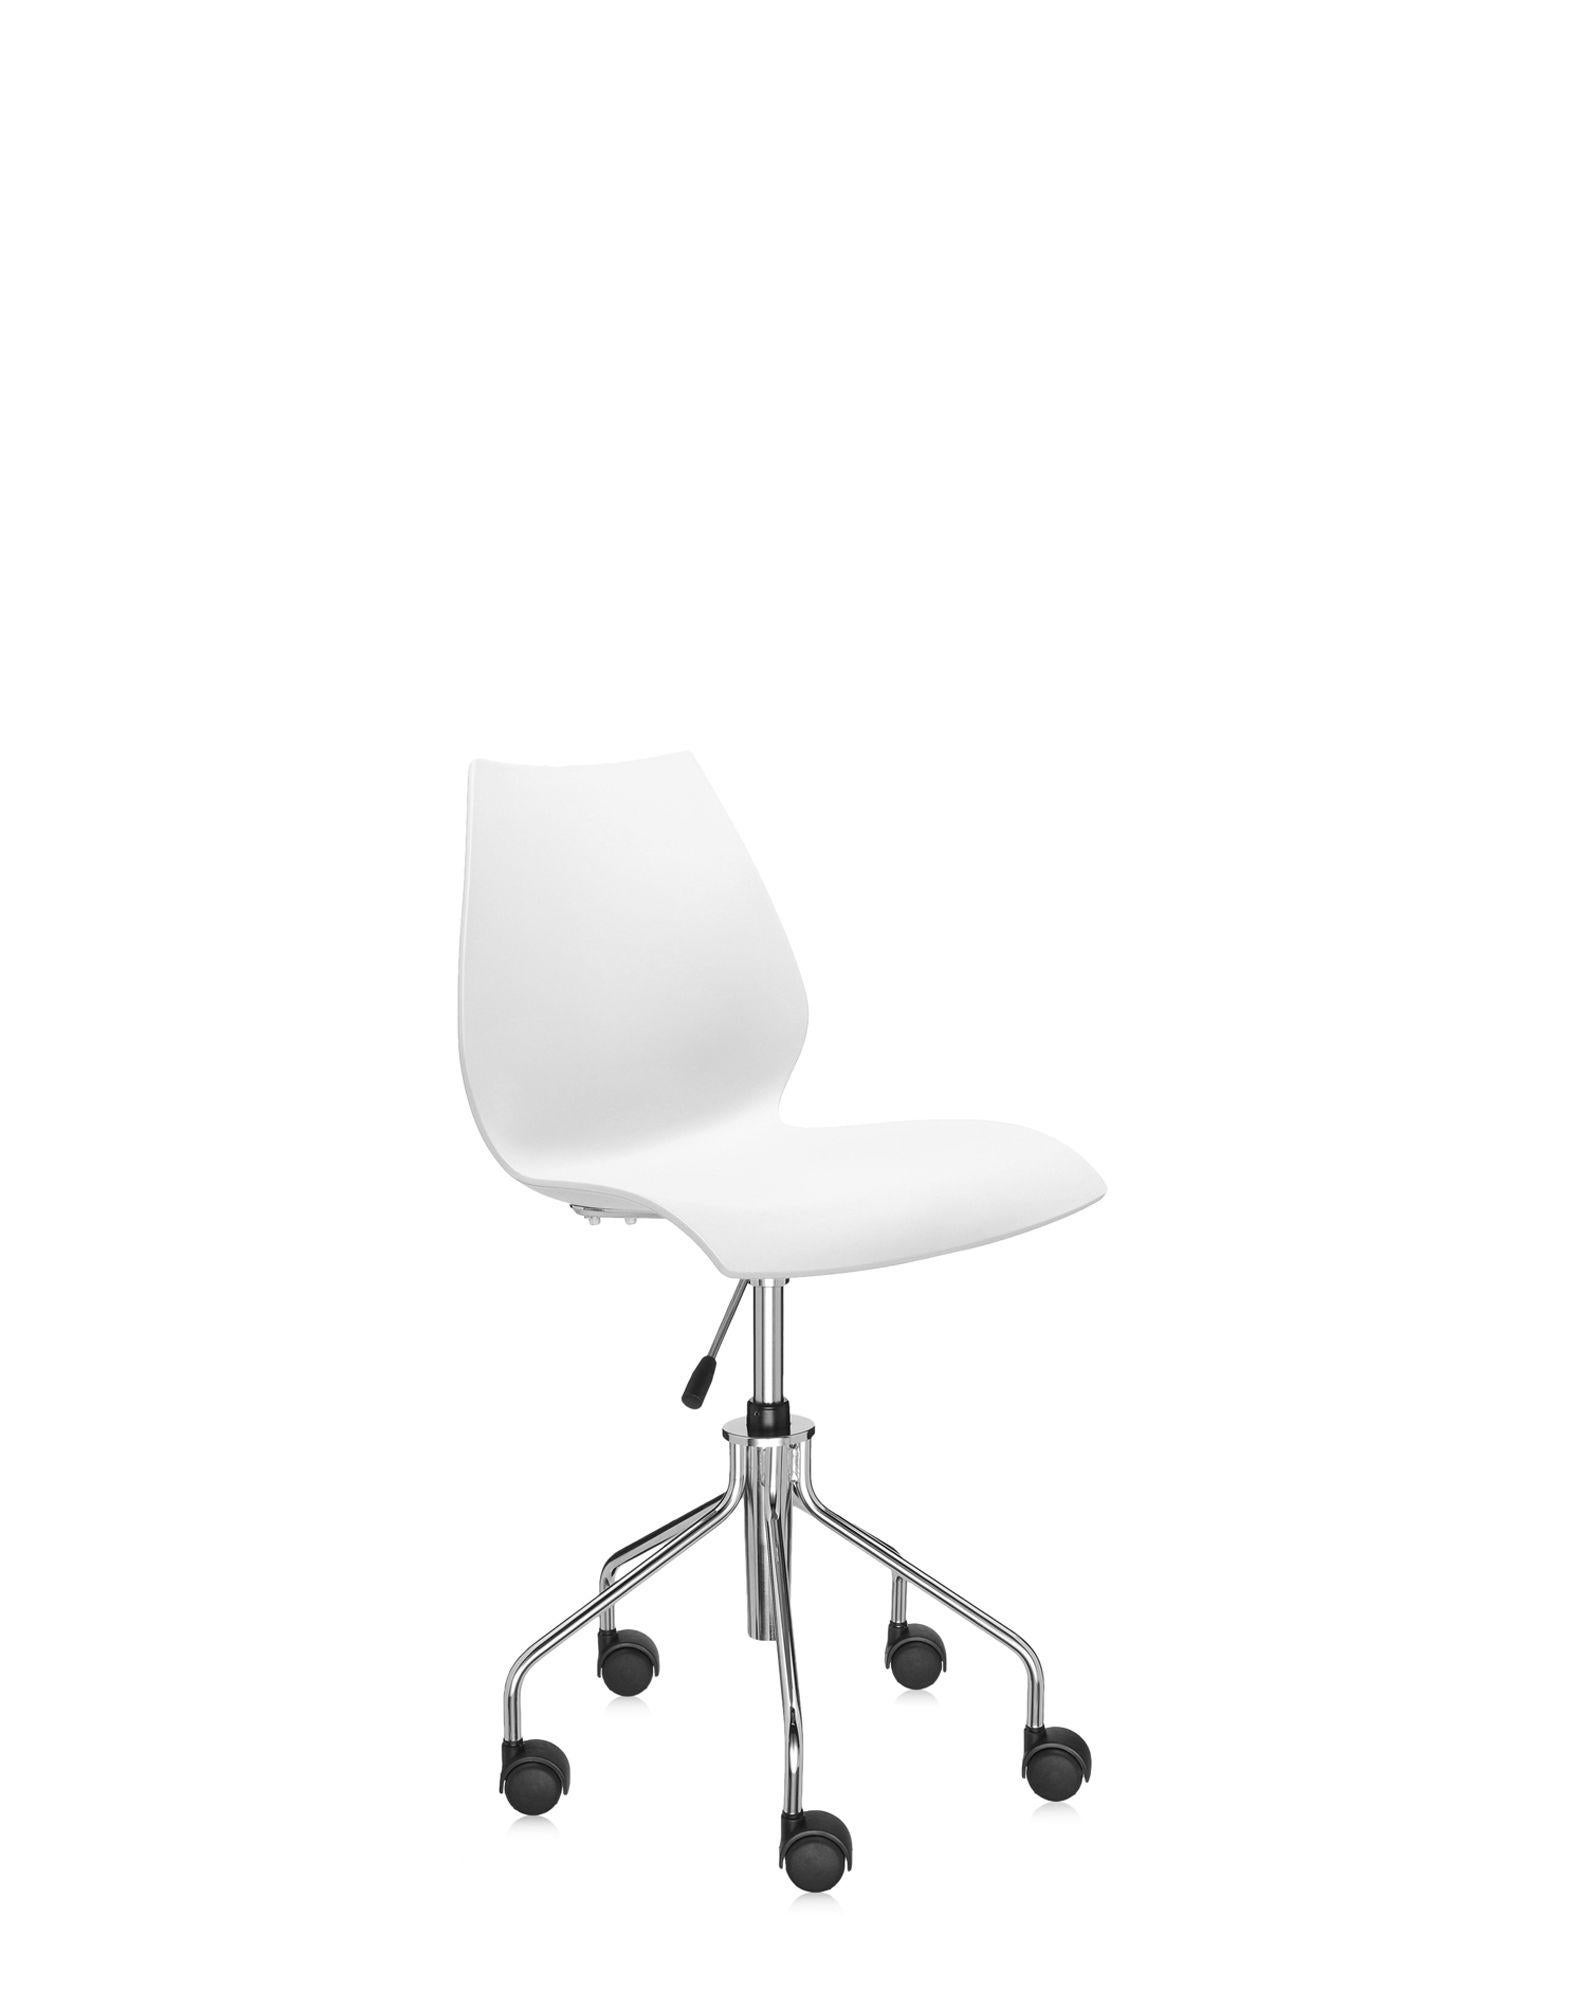 Kartell Maui Swivel Chair Adjustable in Zinc White by Vico Magistretti In New Condition In Brooklyn, NY